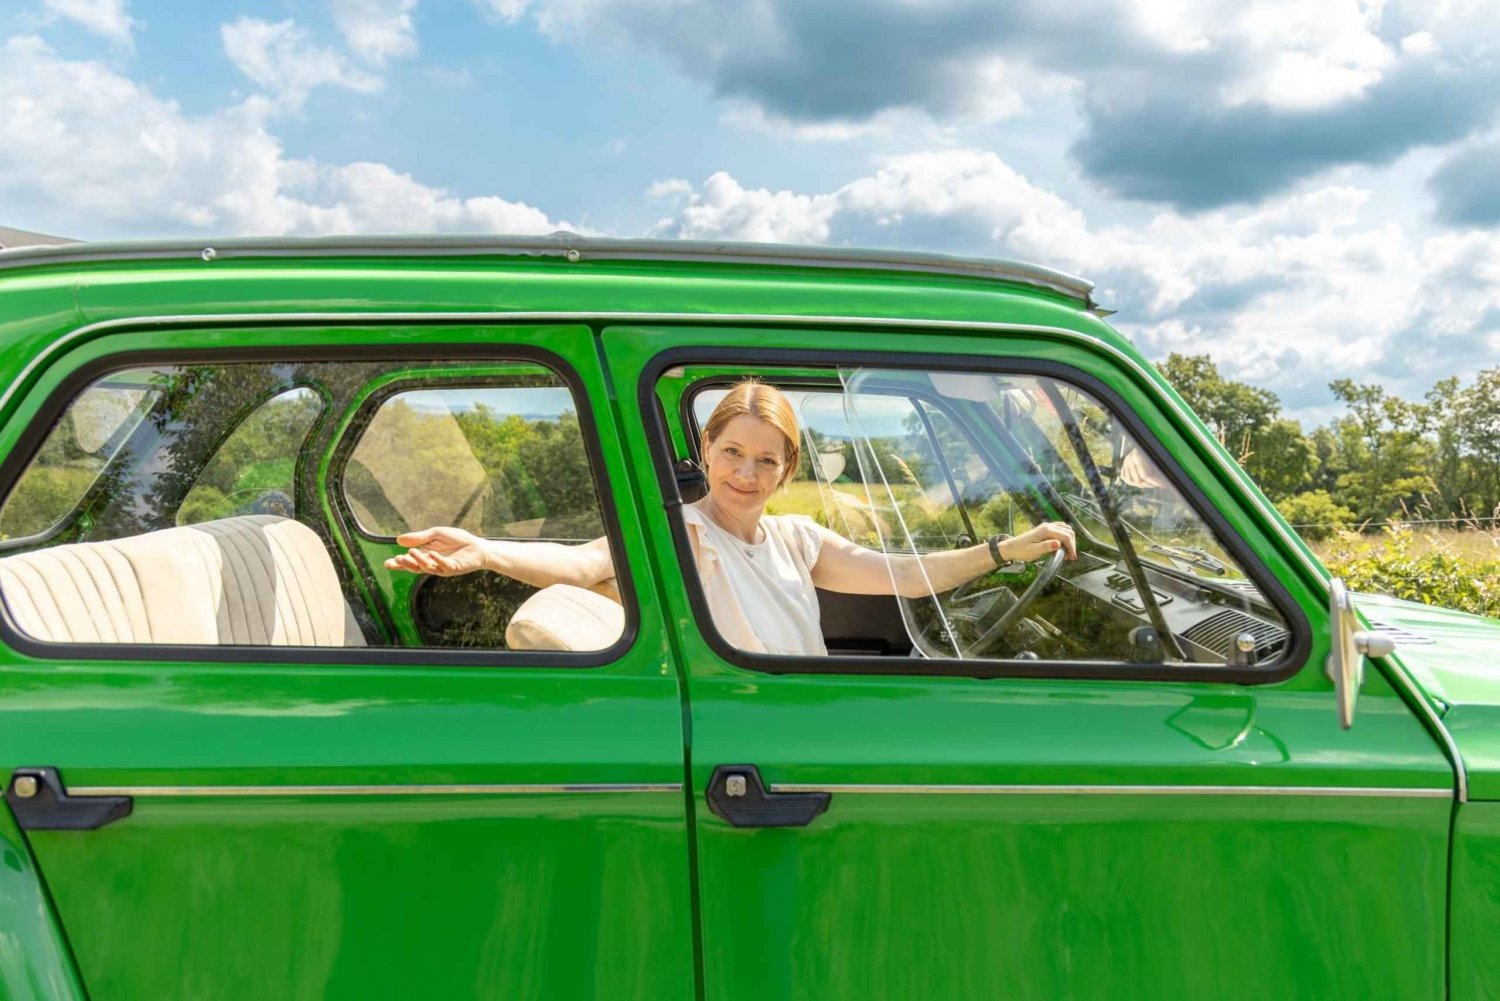 Karst: Personalized Scenic Tour in a Vintage Citroen